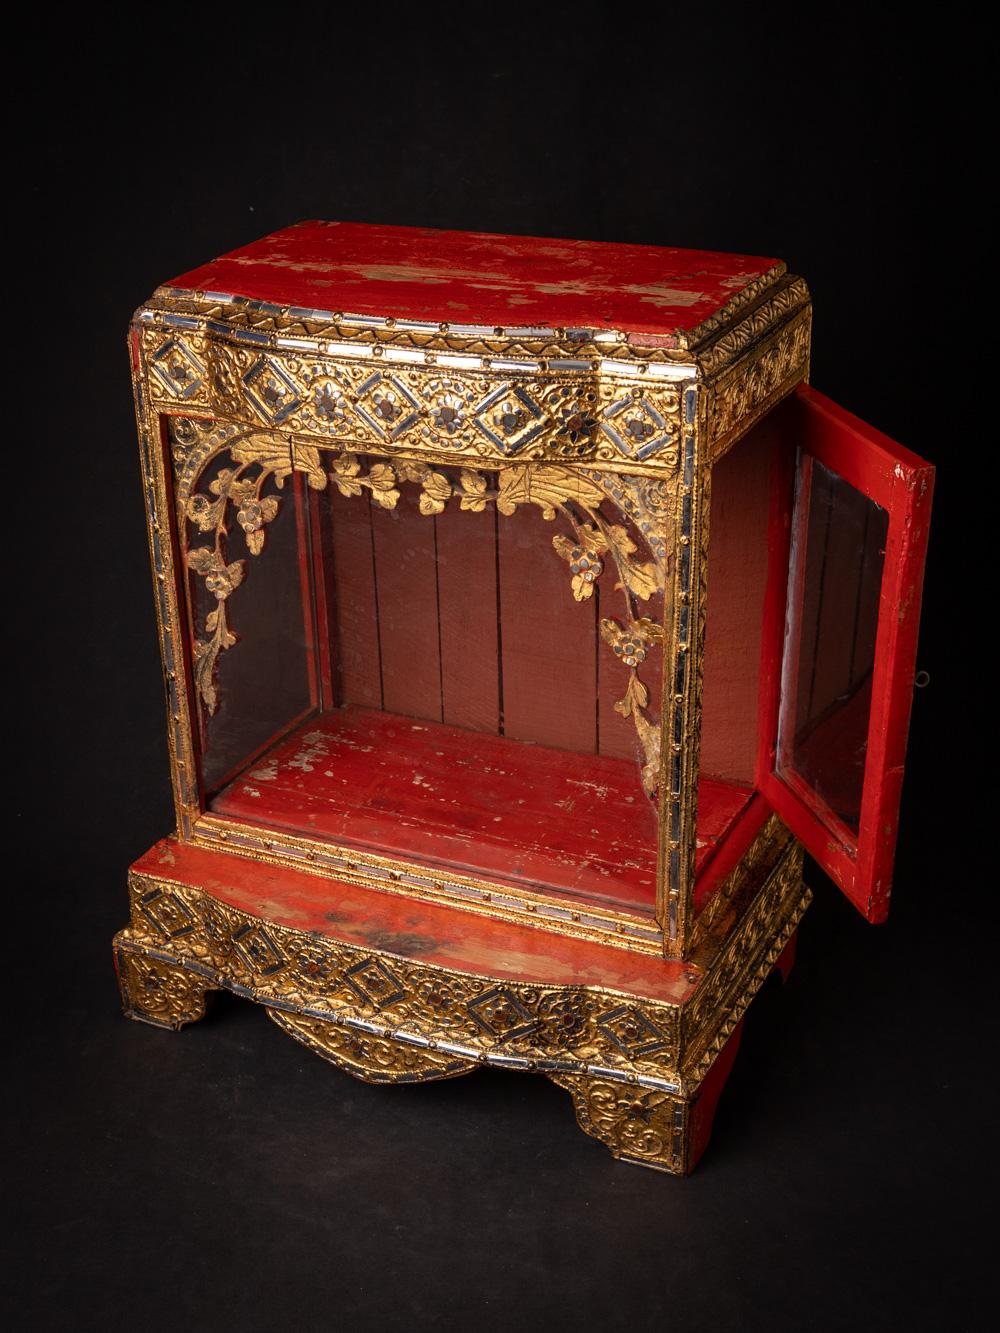 This 19th-century wooden Burmese Buddha temple is a stunning testament to the rich spiritual and artistic heritage of Burma. Crafted from wood and standing at a height of 52.5 cm, with dimensions of 43.7 cm in width and 28 cm in depth, it radiates a